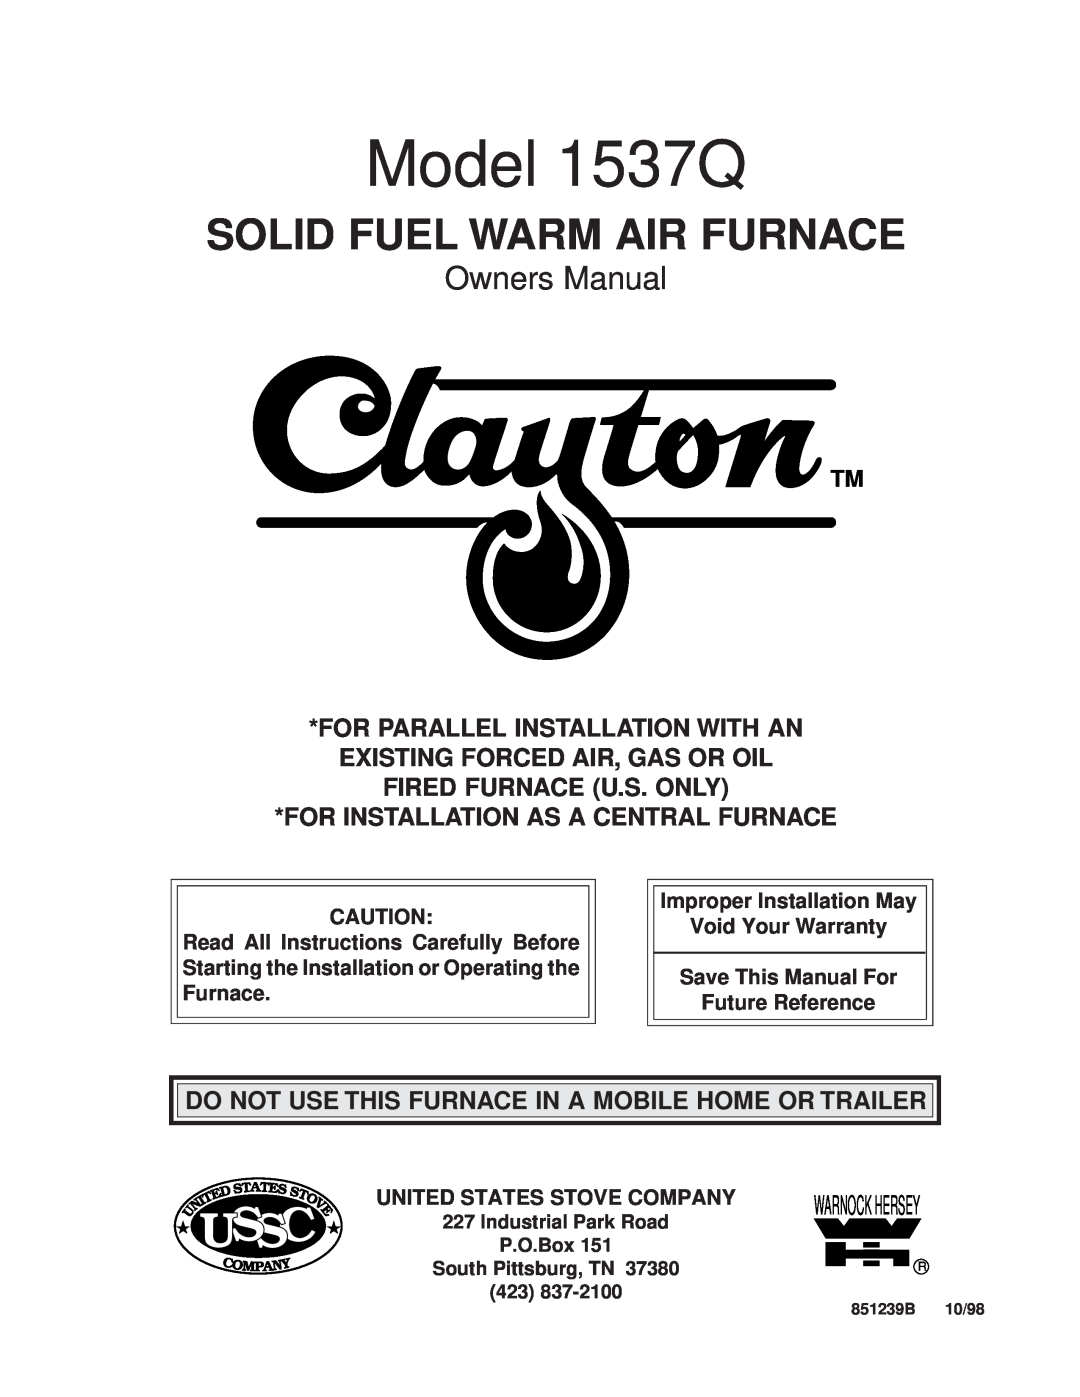 United States Stove owner manual Solid Fuel Warm Air Furnace, Model 1537Q, Ussc, Save This Manual For Future Reference 